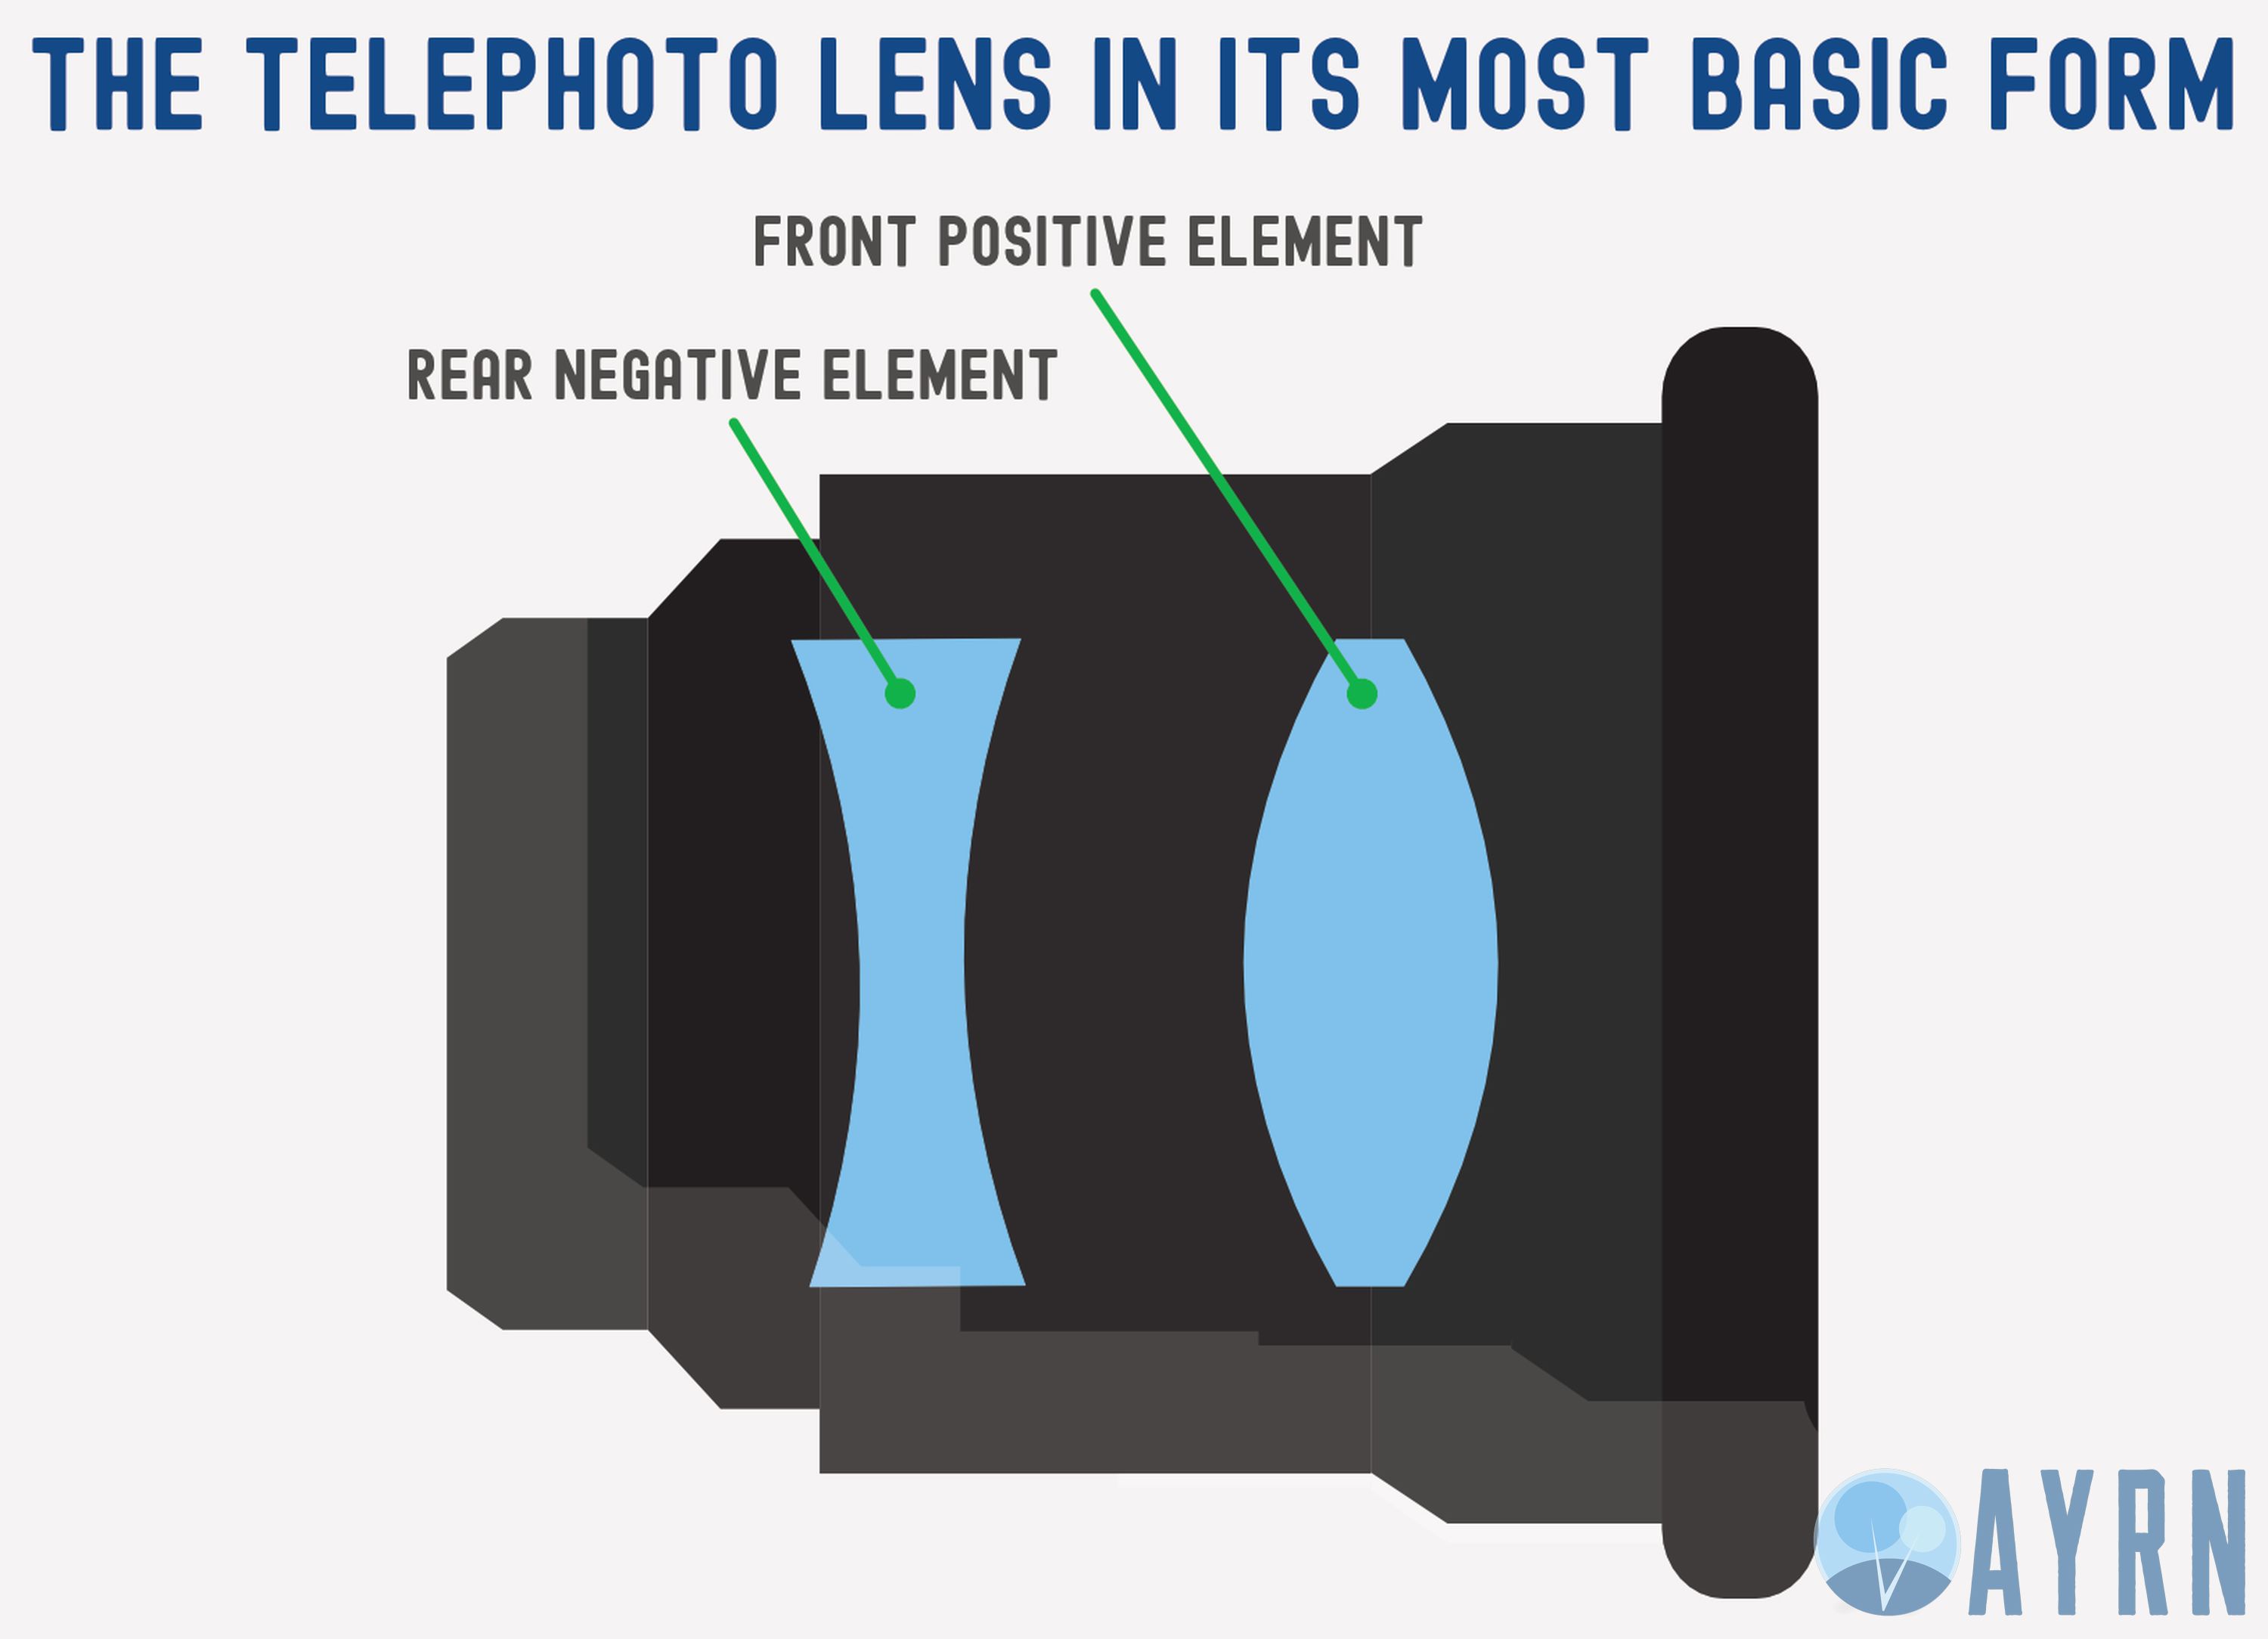 A diagram showing the most basic telephoto optical design possible